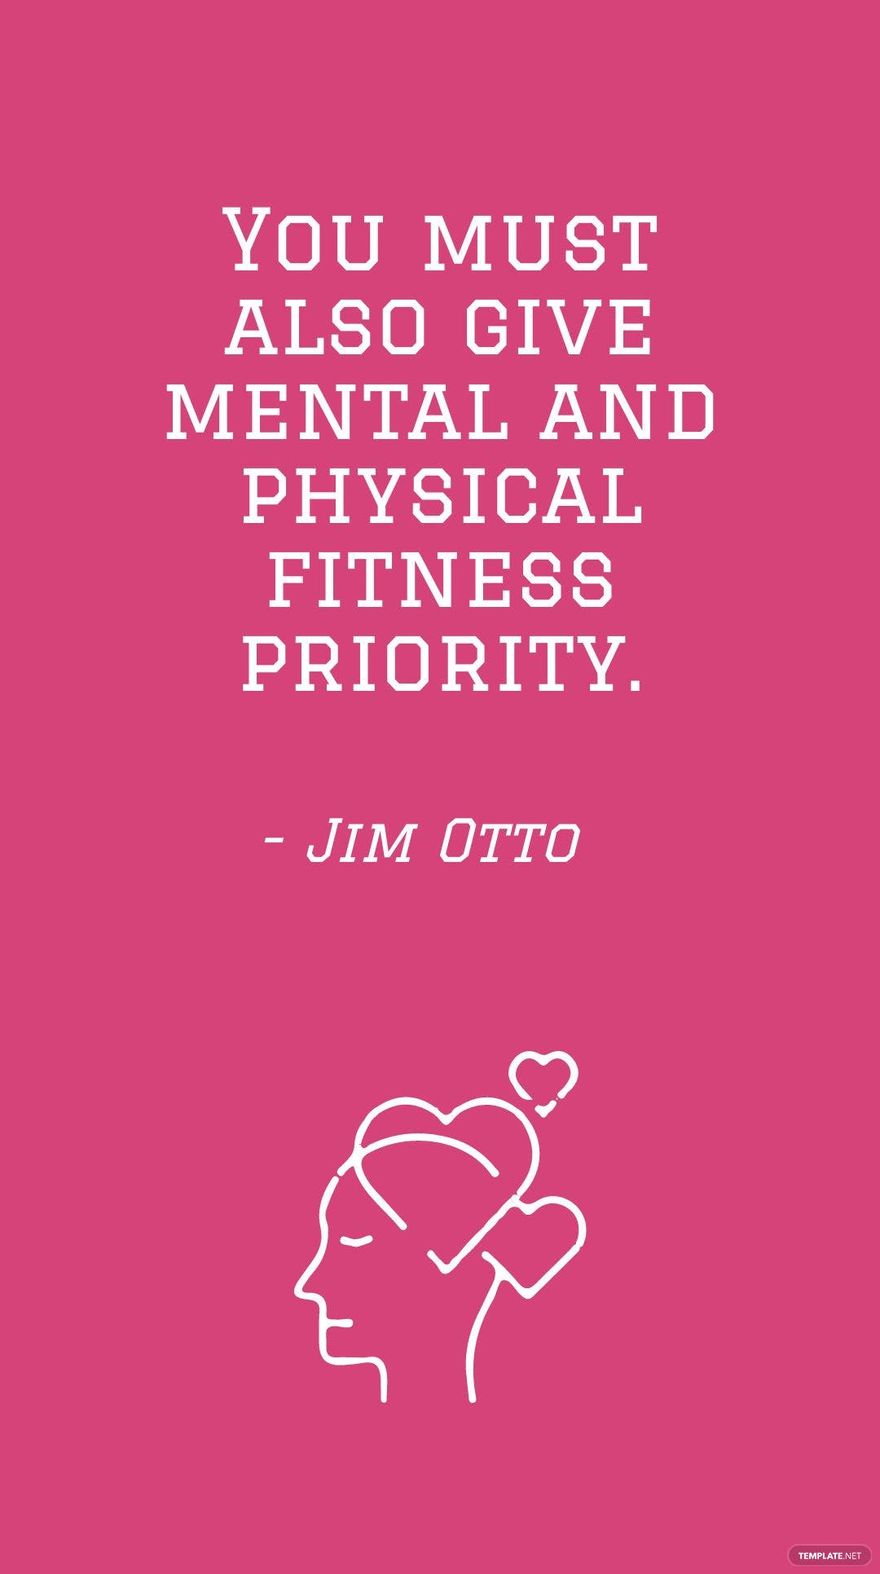 Jim Otto - You must also give mental and physical fitness priority.